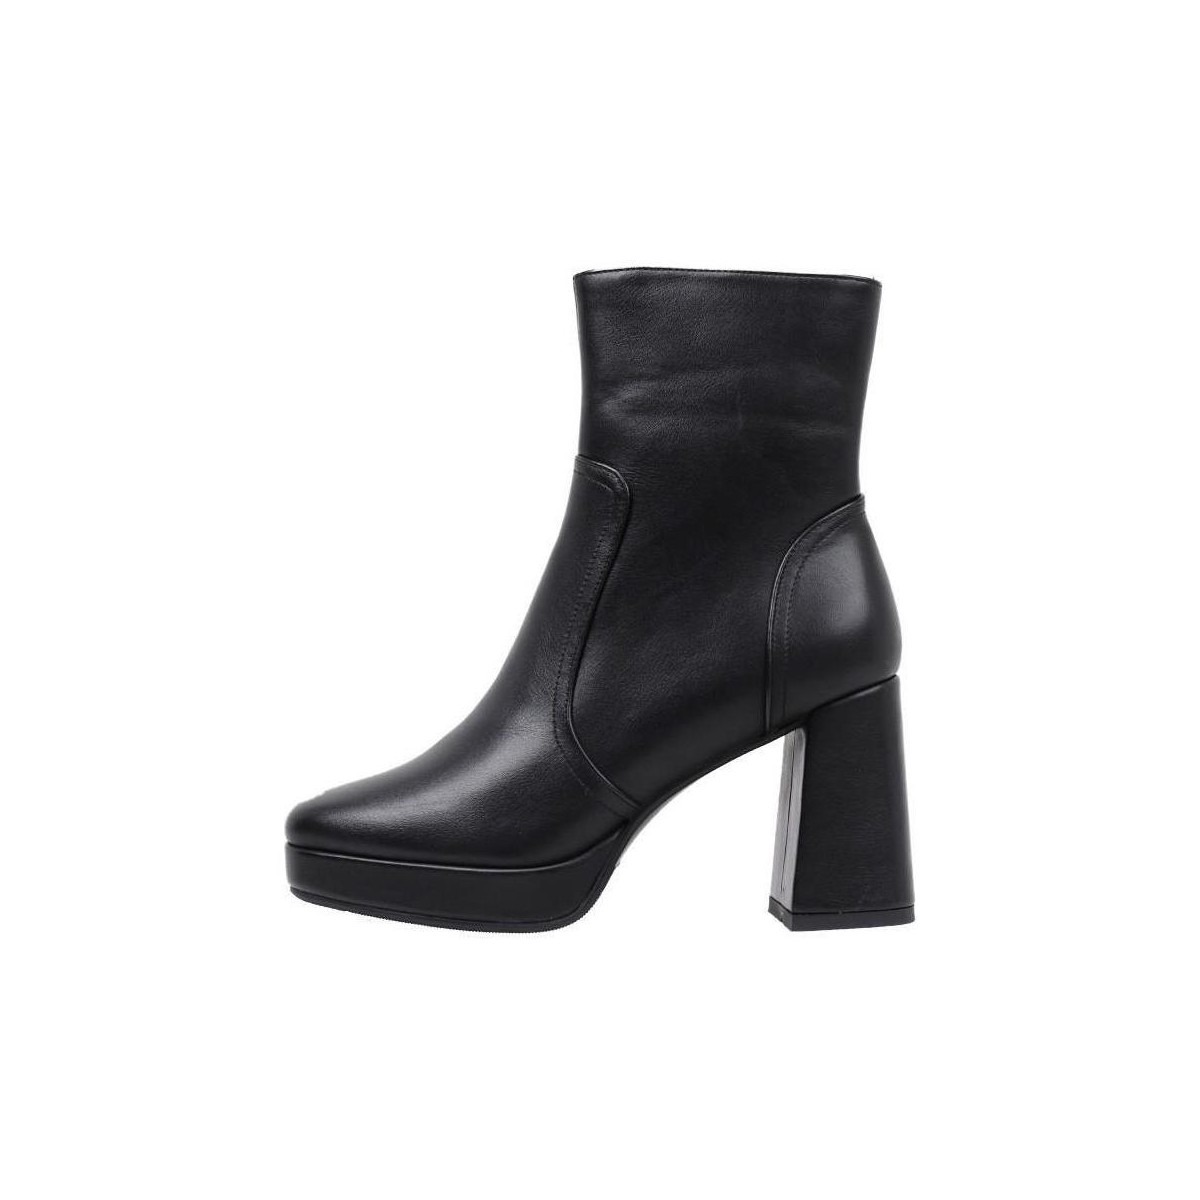 Krack - Woman Ankle Boots in Black by Spartoo GOOFASH